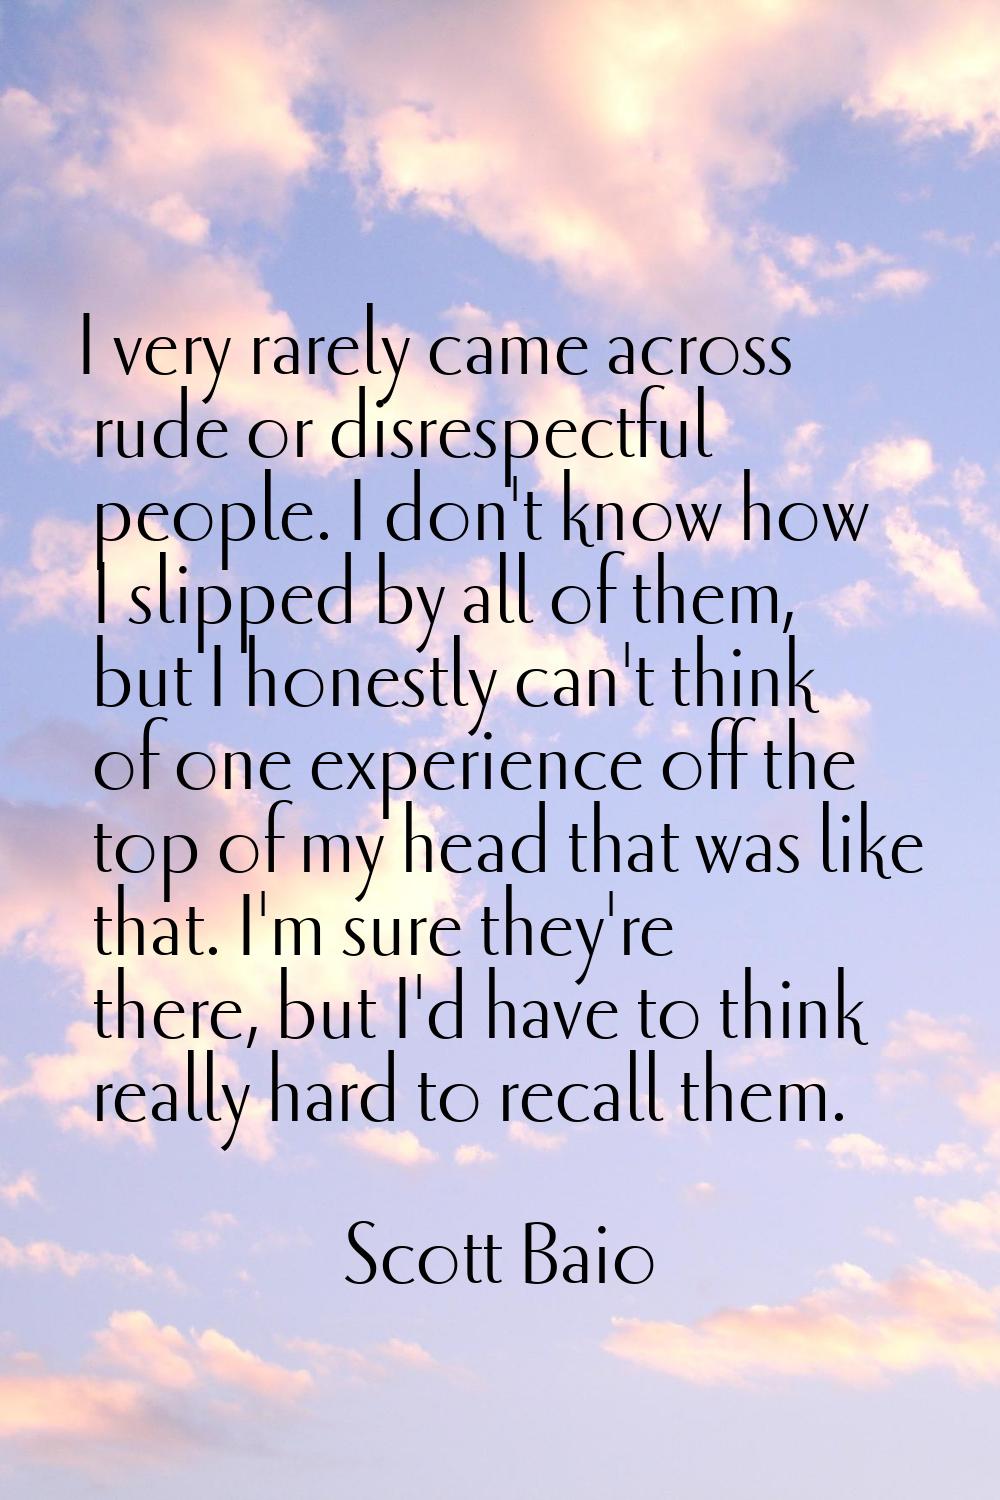 I very rarely came across rude or disrespectful people. I don't know how I slipped by all of them, 